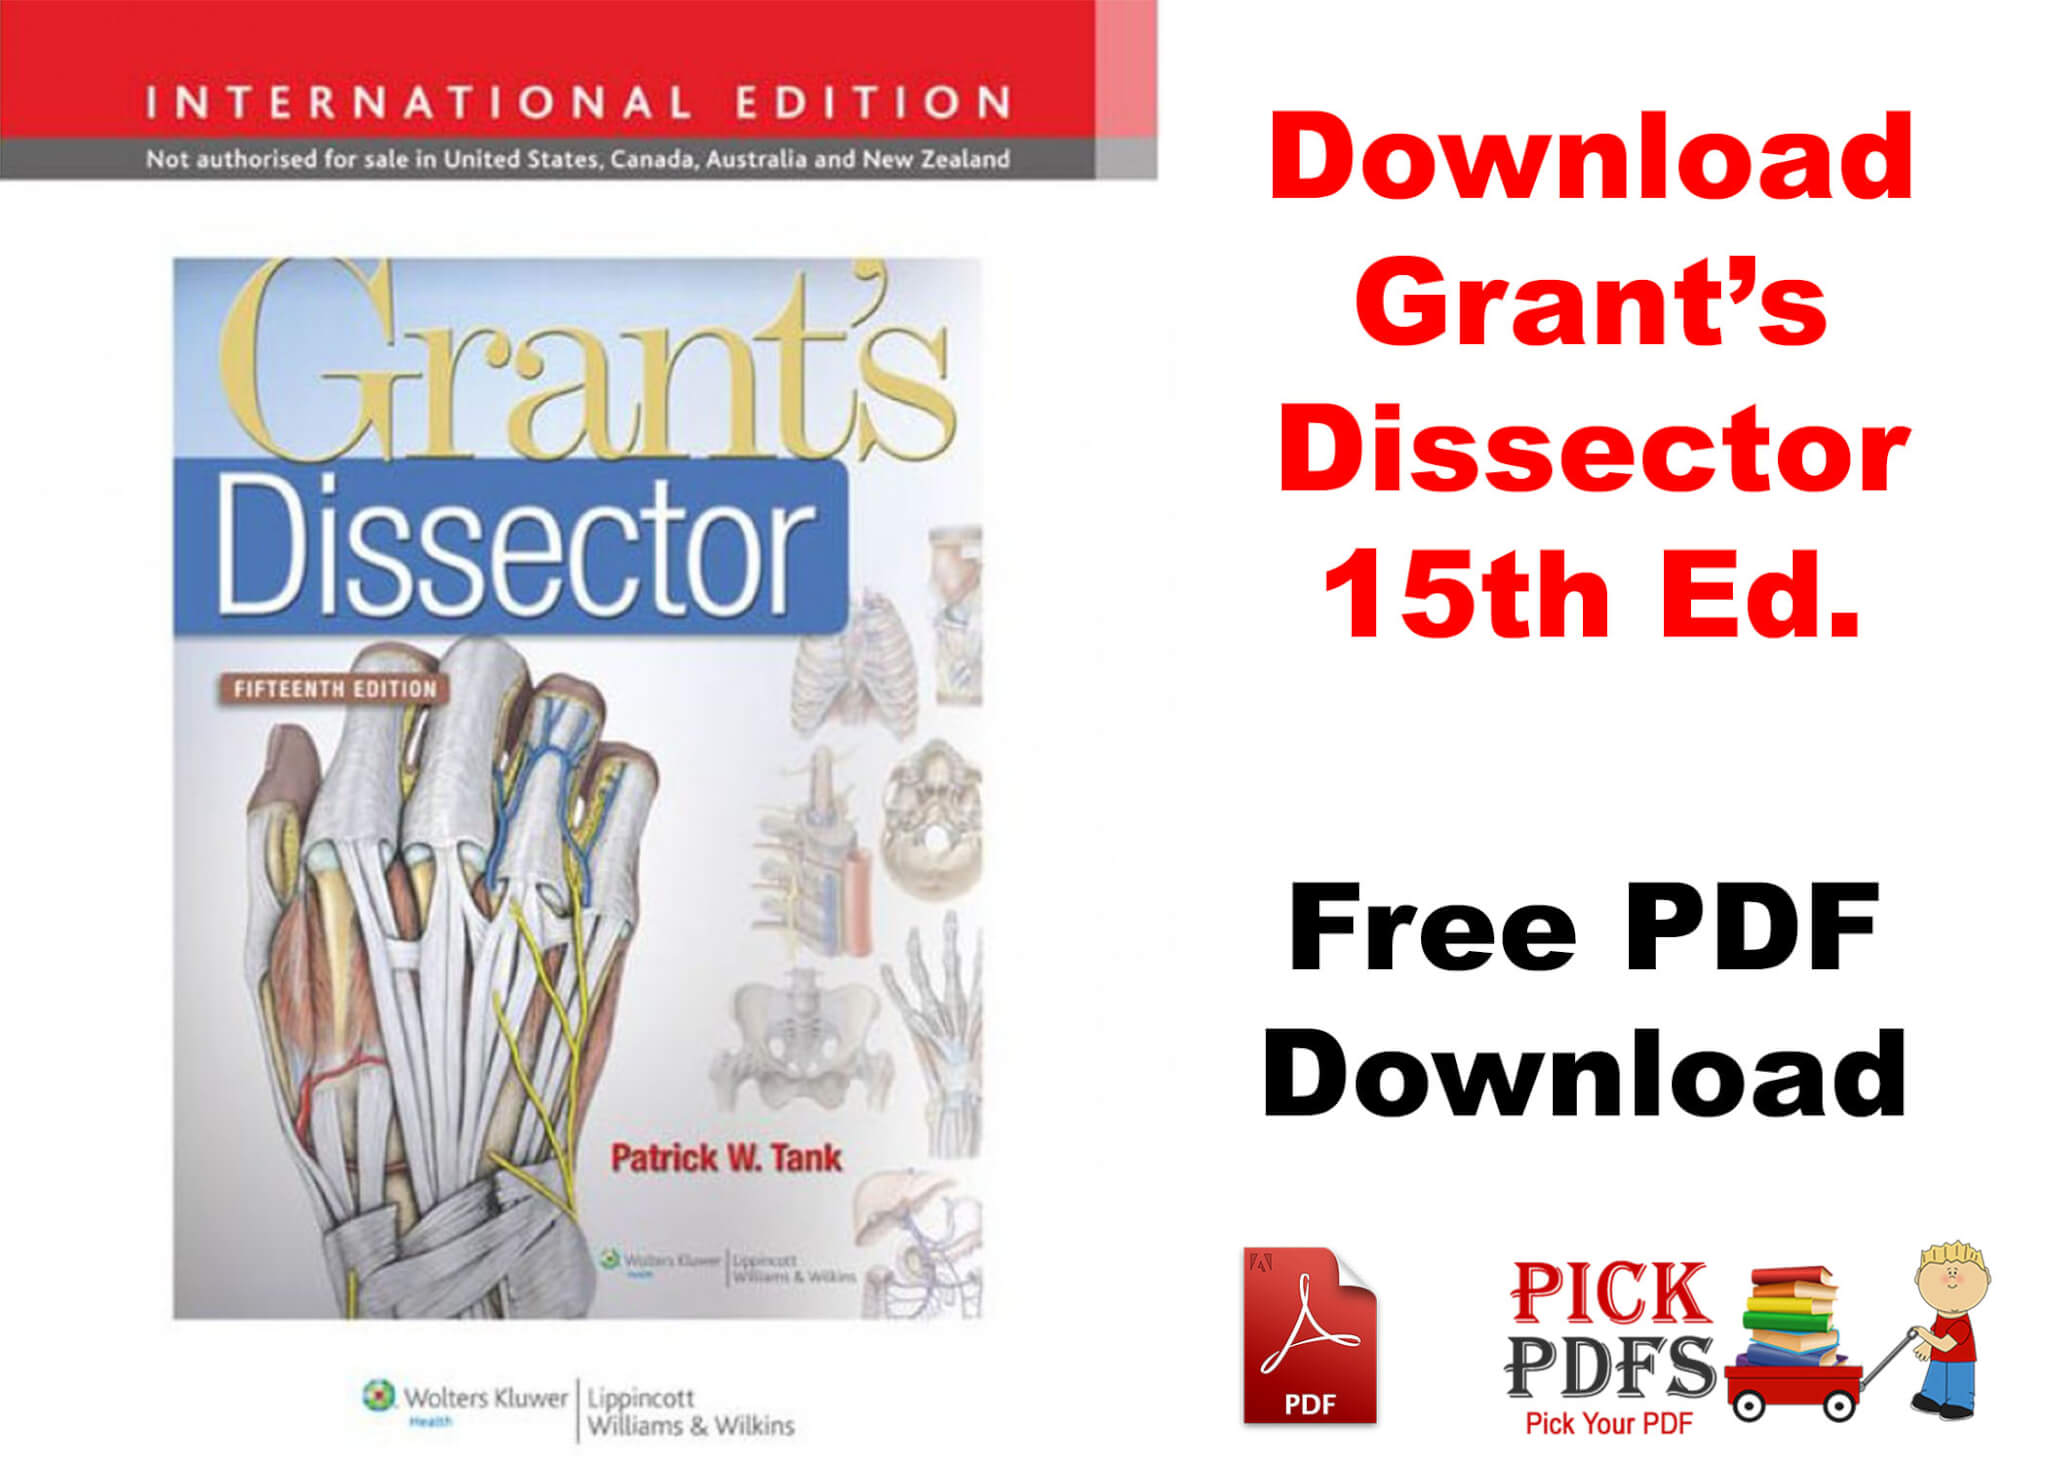 Grant dissector free PDF